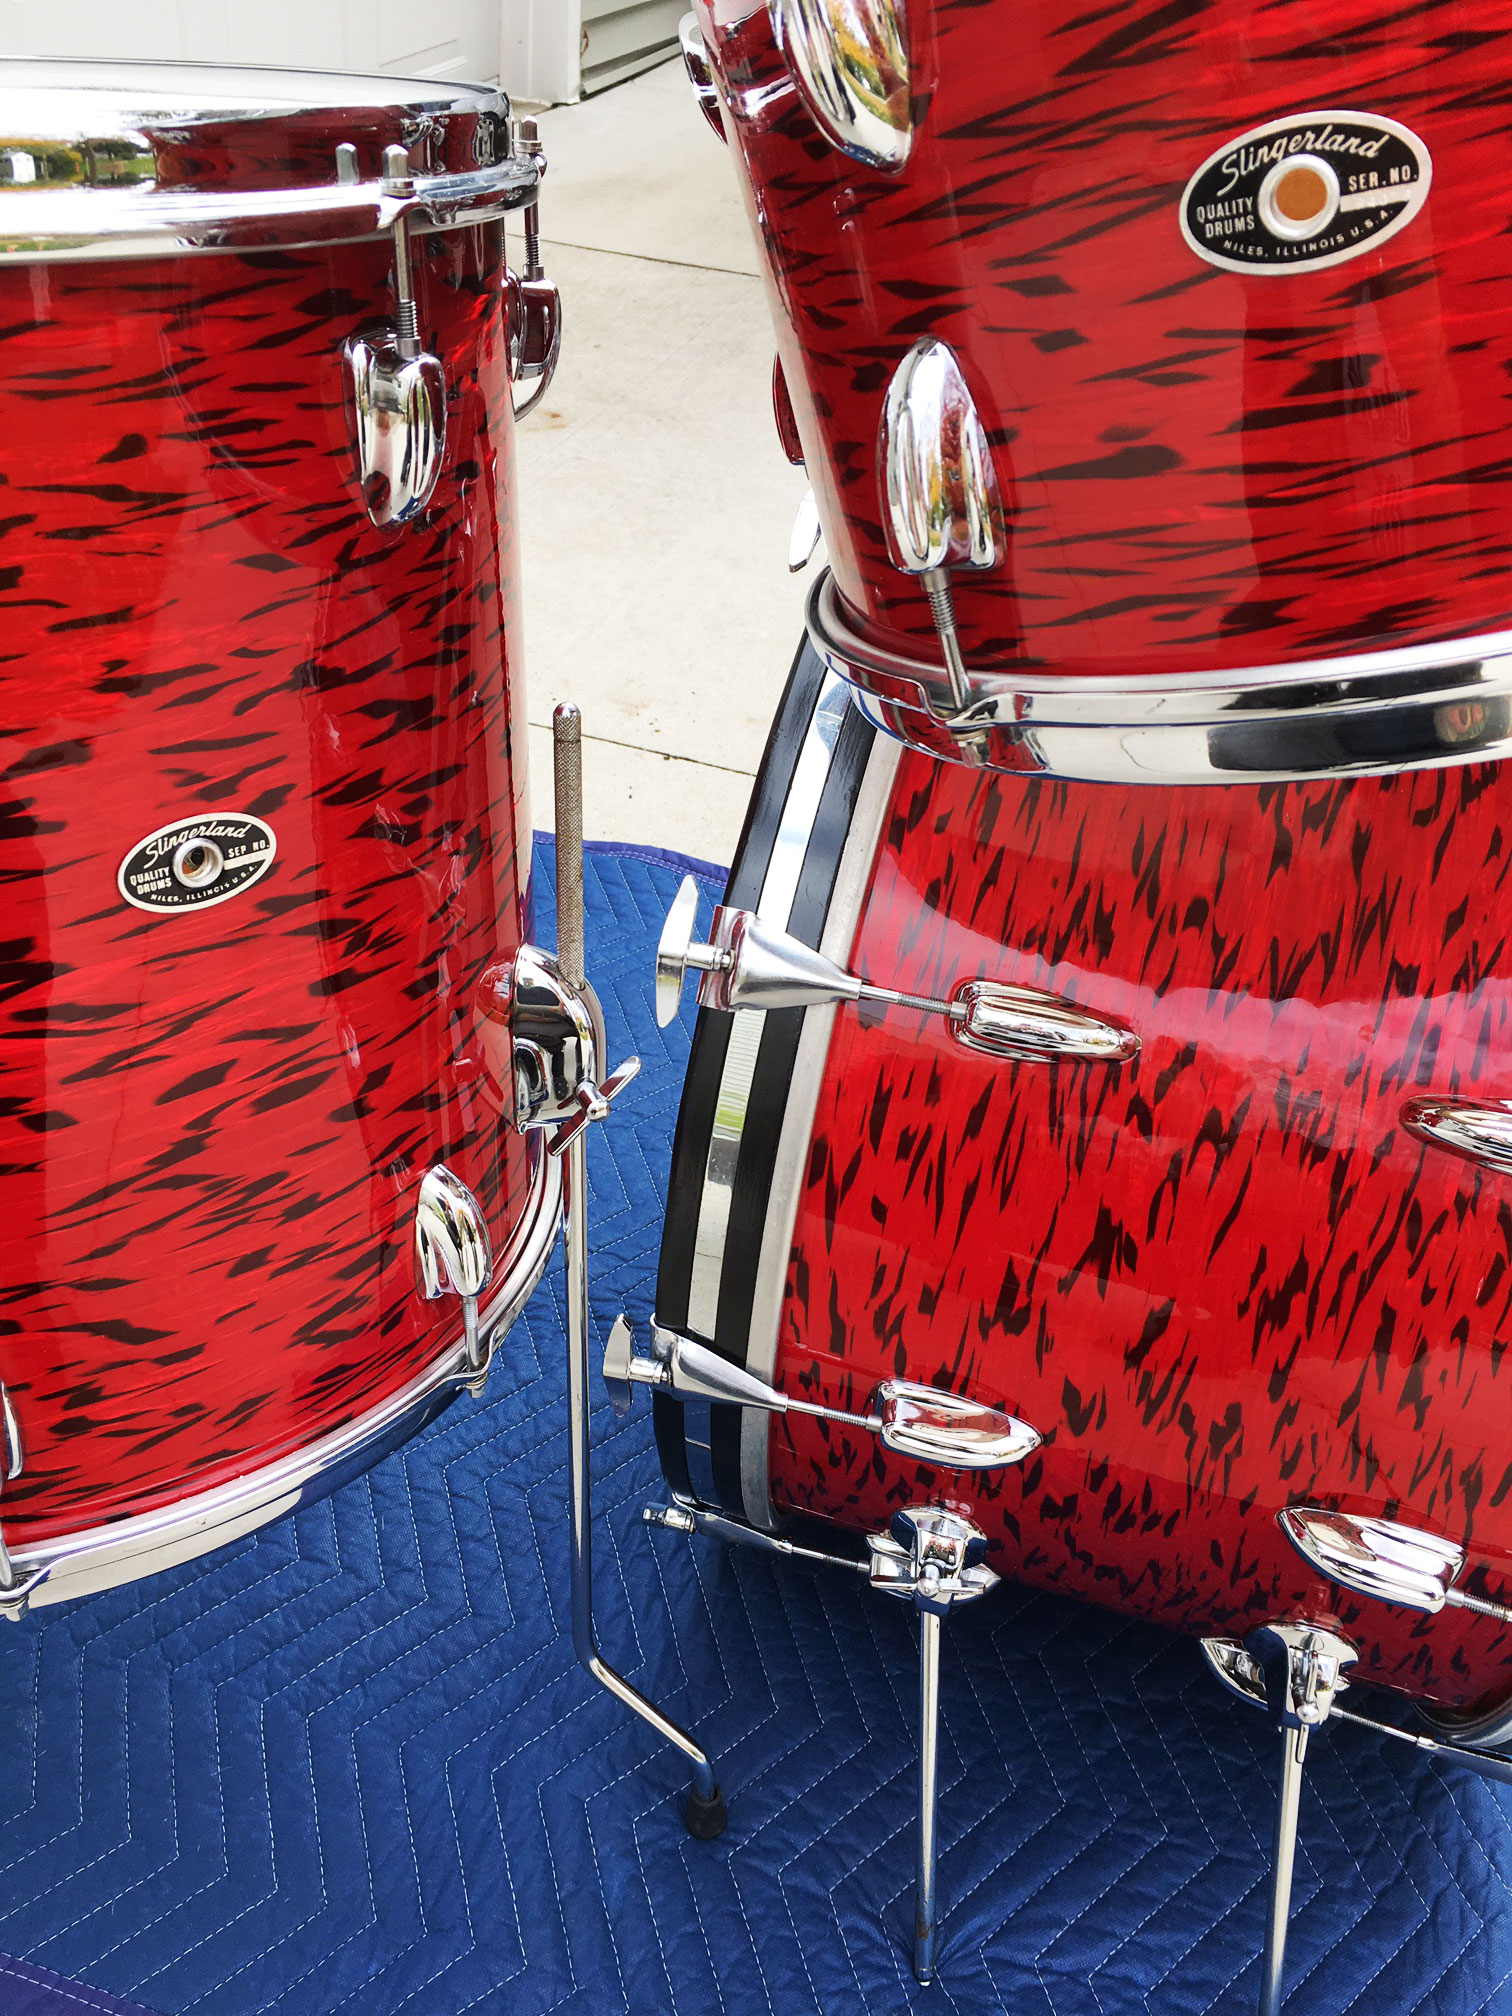 Vintage Early 1970s Slingerland Avante Outfit 60N in Red Tiger Pearl